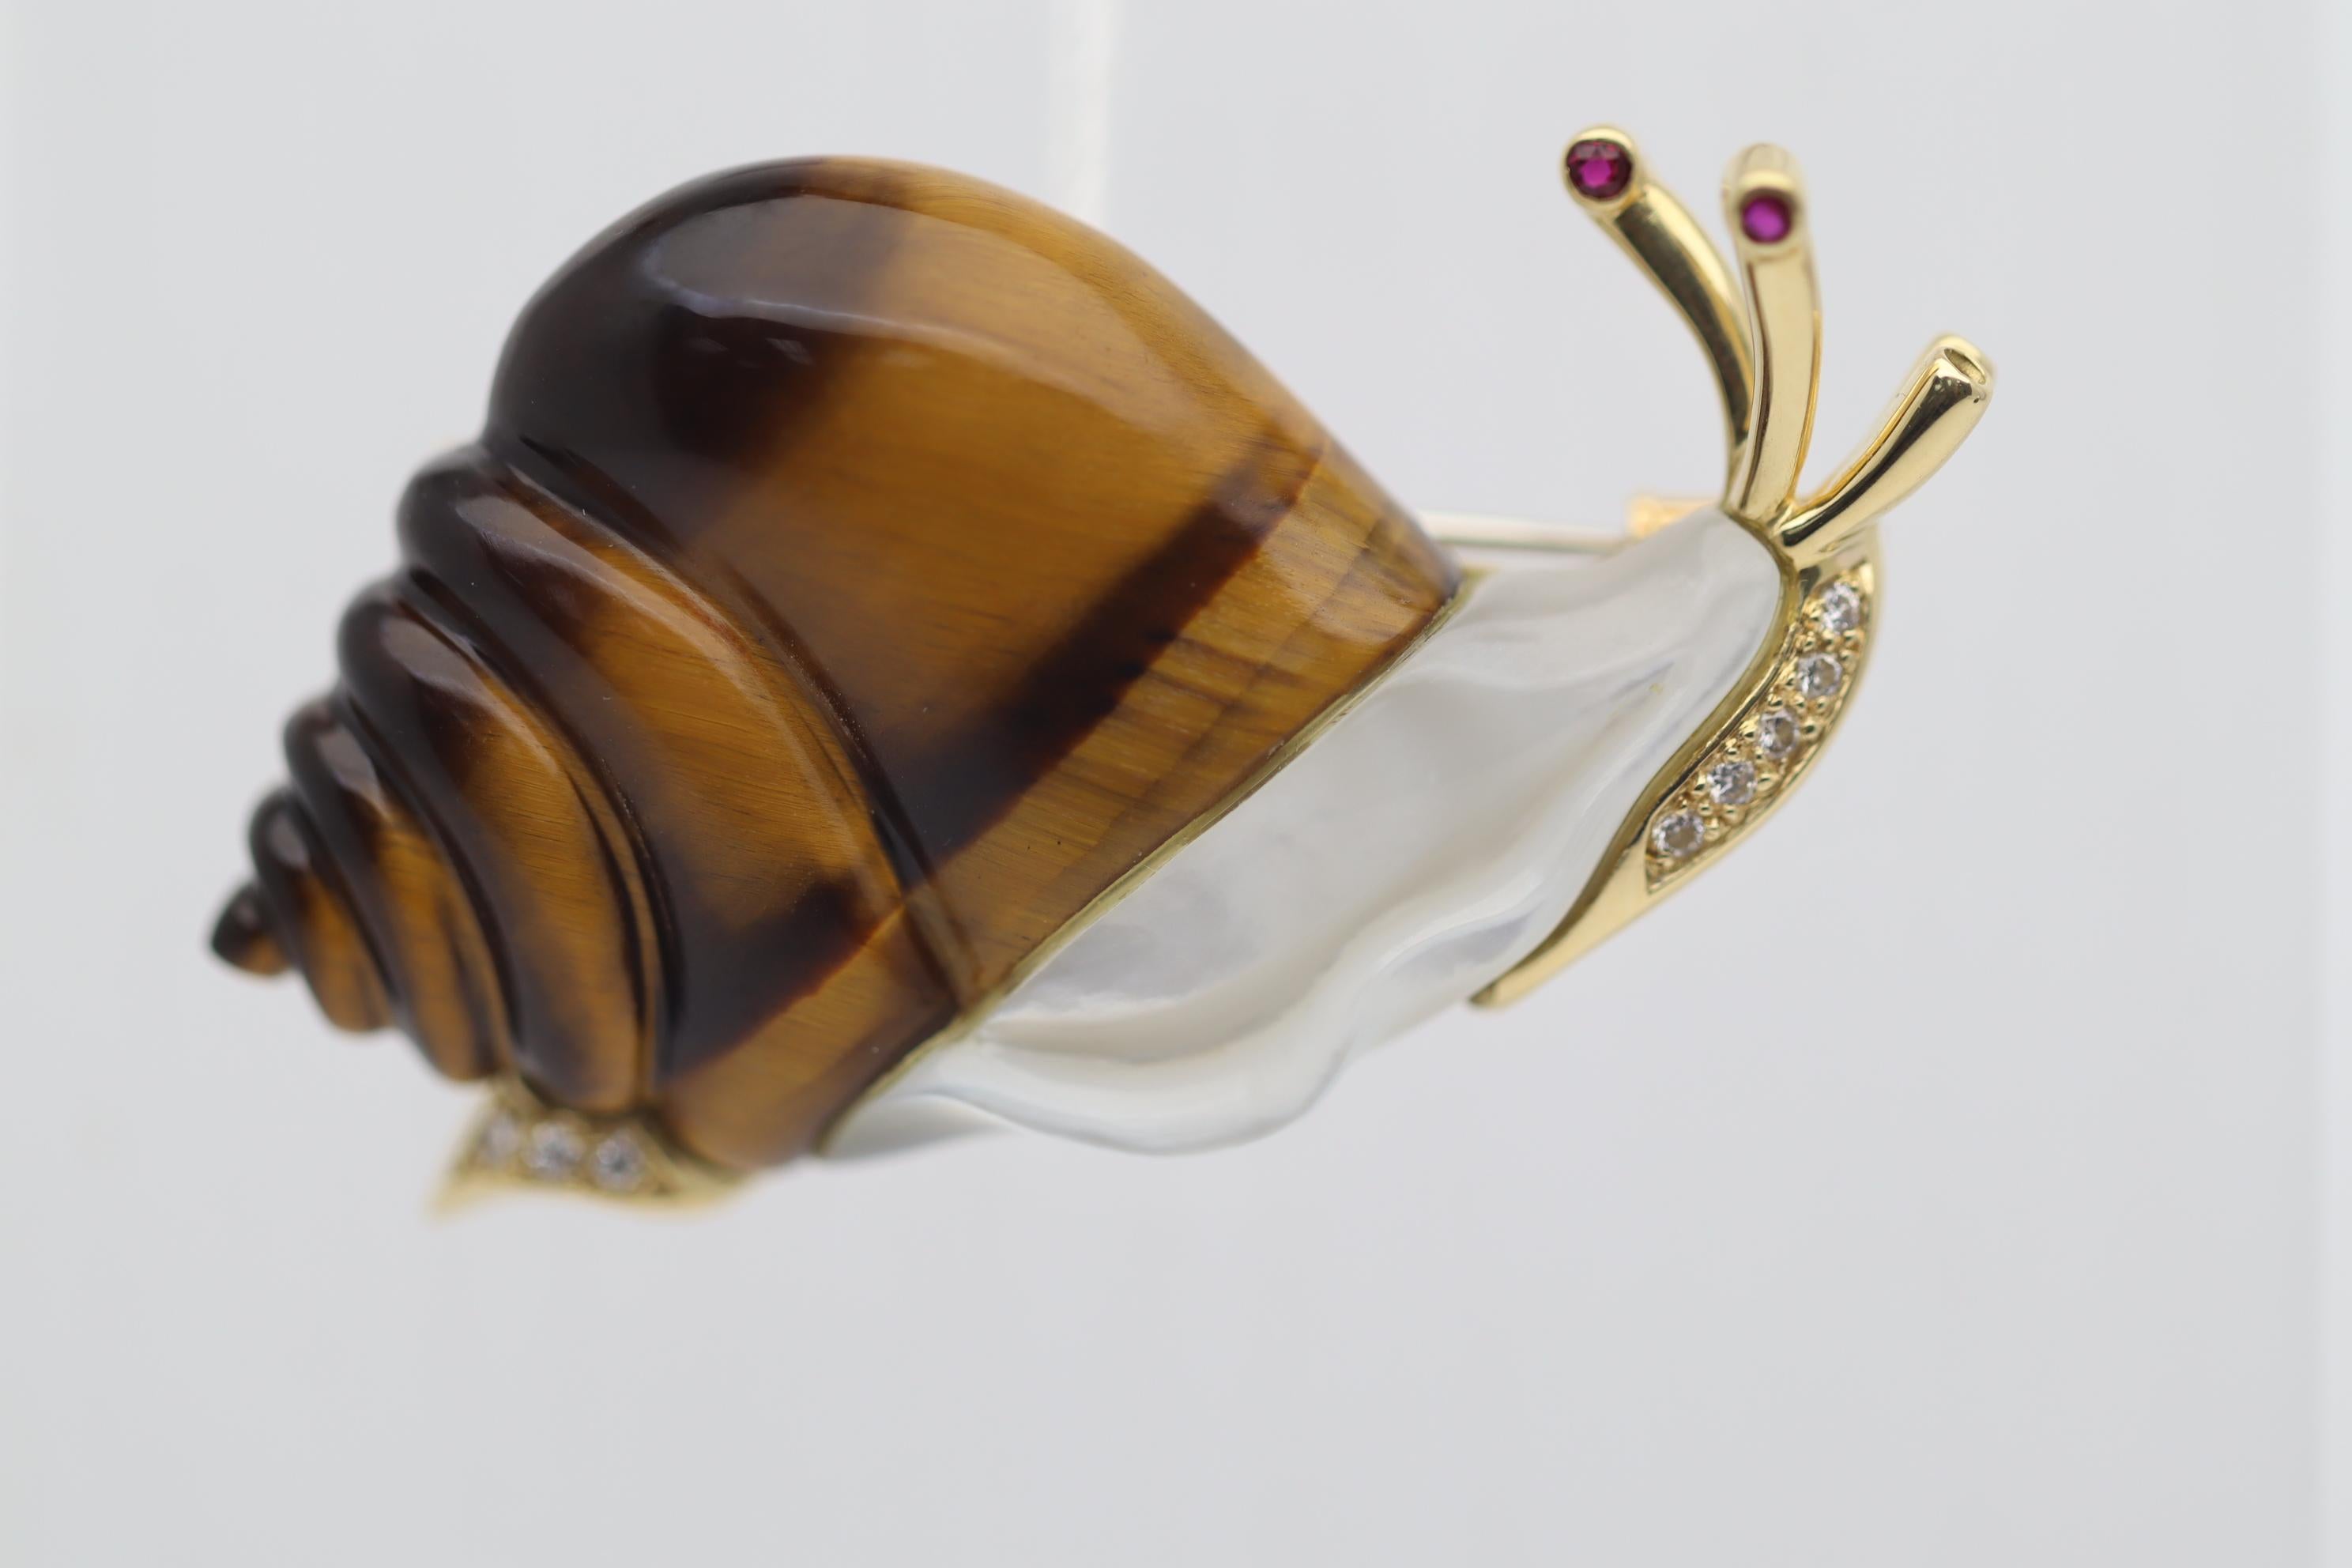 The most sweet and loving snail you will ever see! Made with a hand-carved tigers eye shell and a mother-of-pearl body, light rolls across the piece for added realism. It is framed and finished in 18k yellow gold with diamond set on its face and